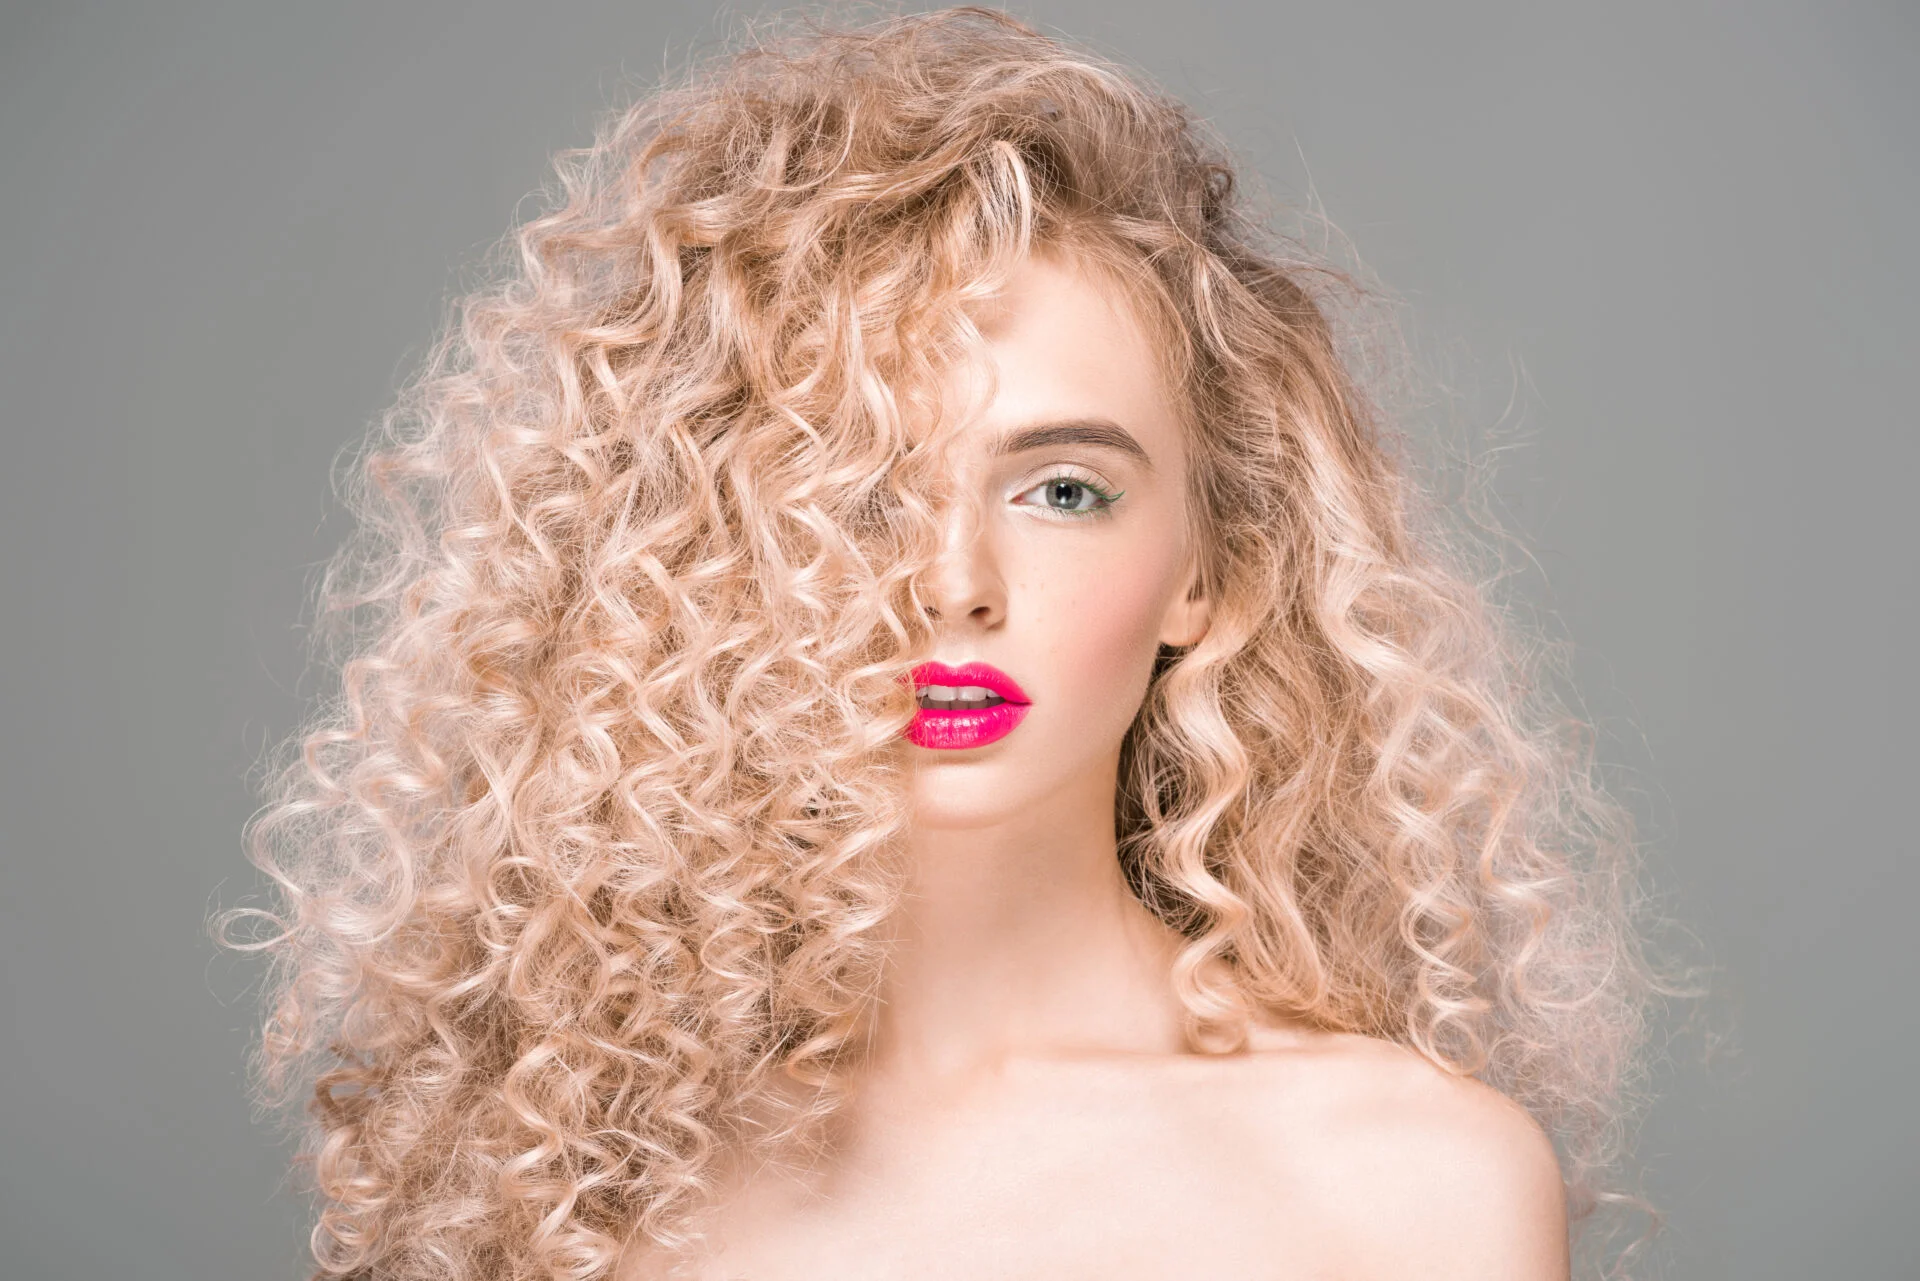 Woman with curly blonde hair